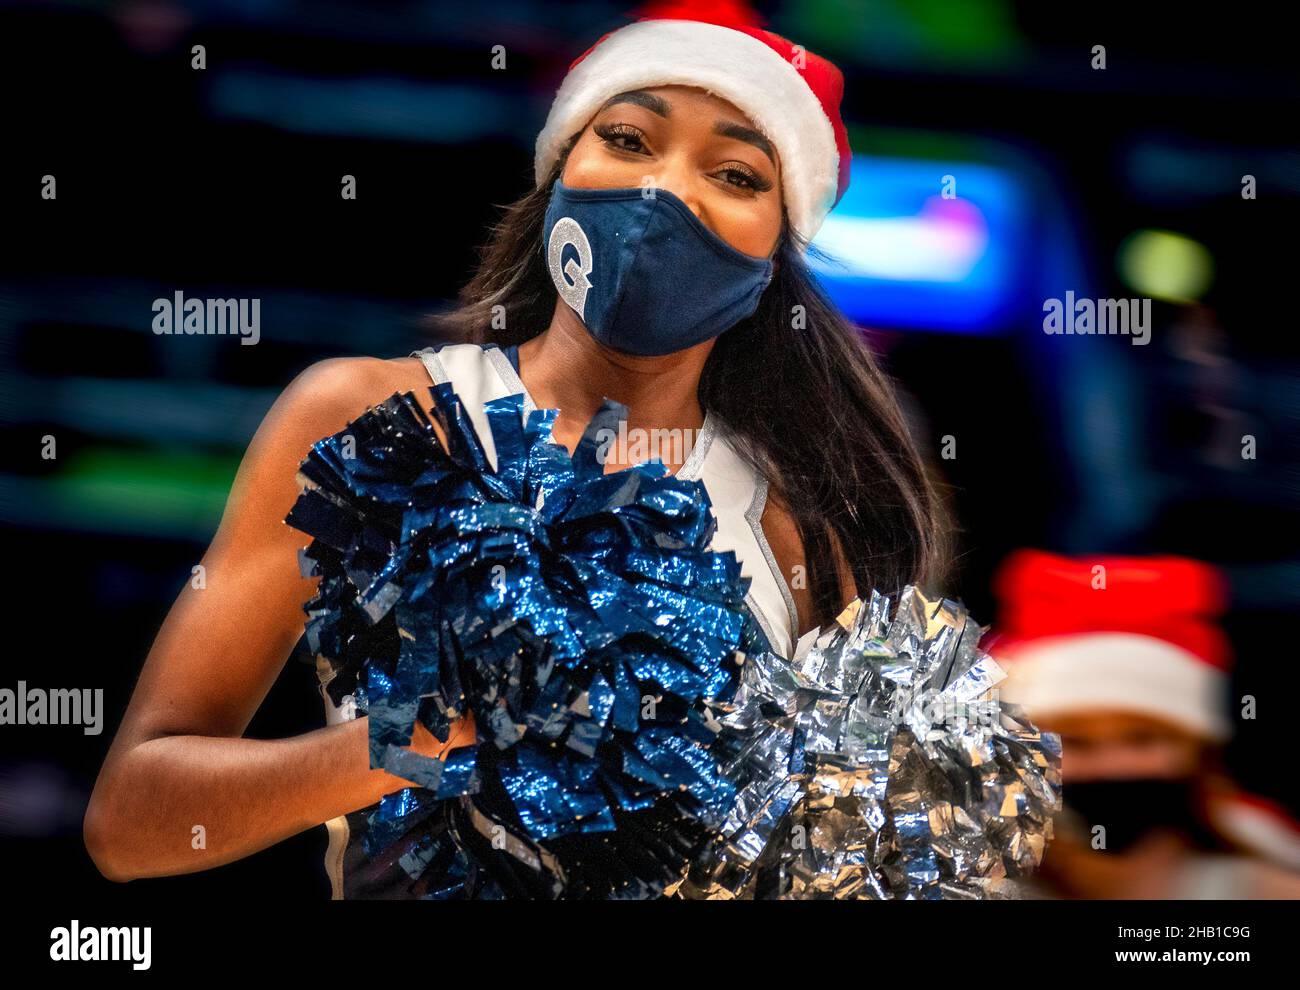 WASHINGTON, DC - DECEMBER 15:  Georgetown Hoyas cheerleader in a Christmas motif during a college basketball game between the Georgetown Hoyas and the Stock Photo